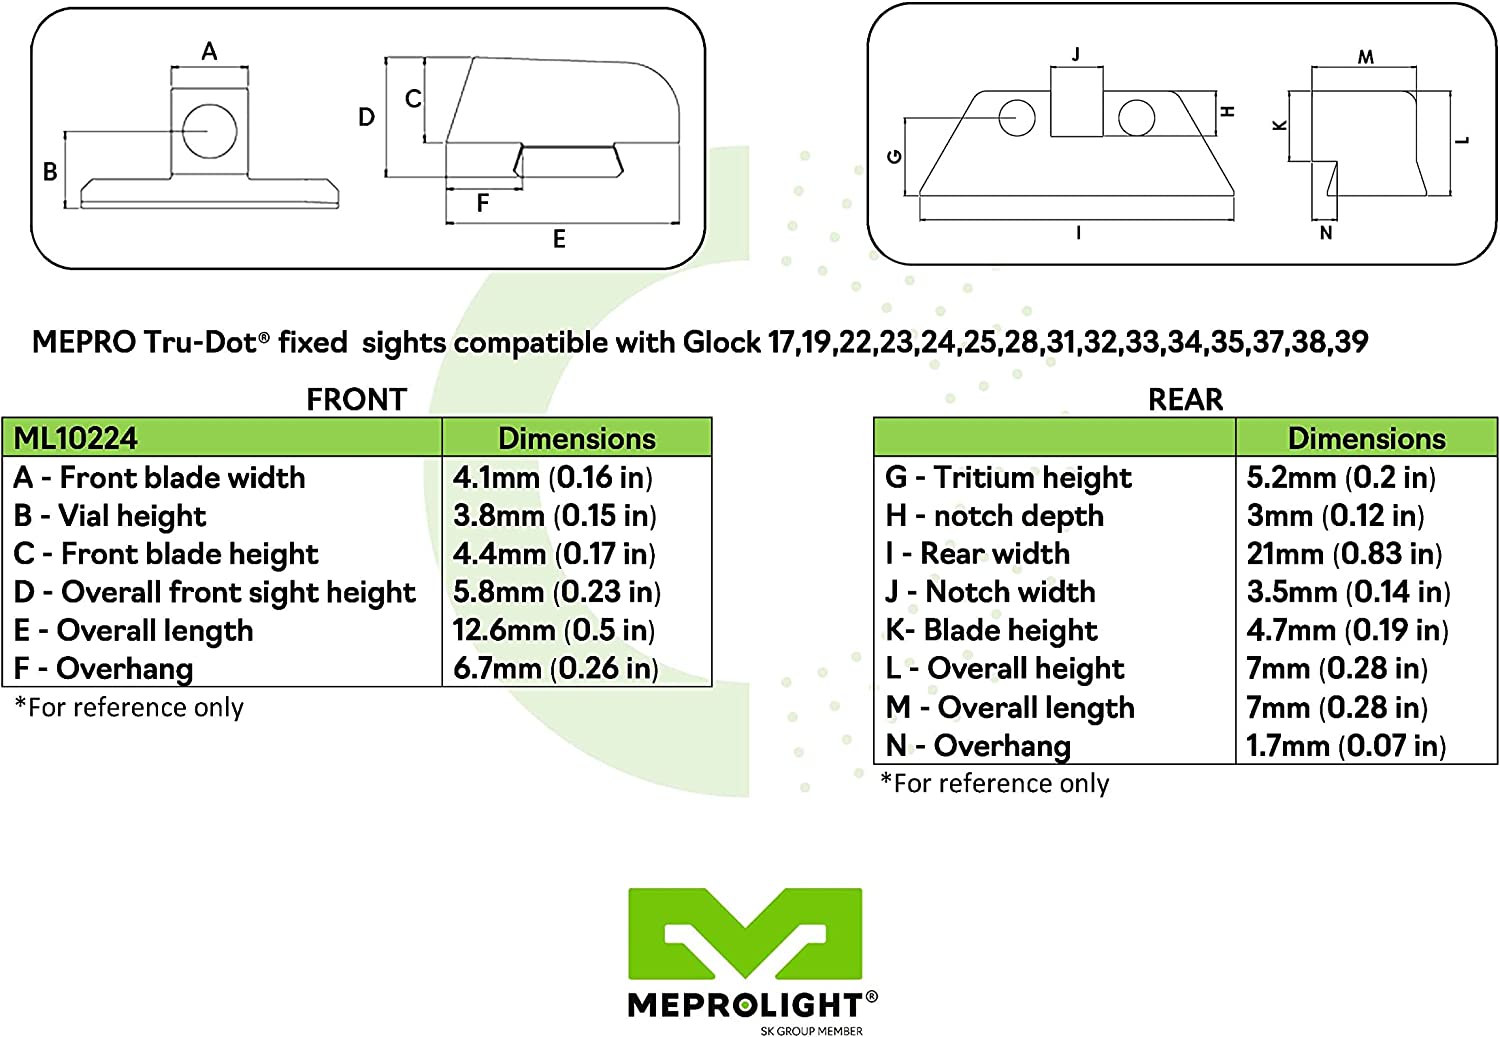 Sight chart for the Glock 17, 19